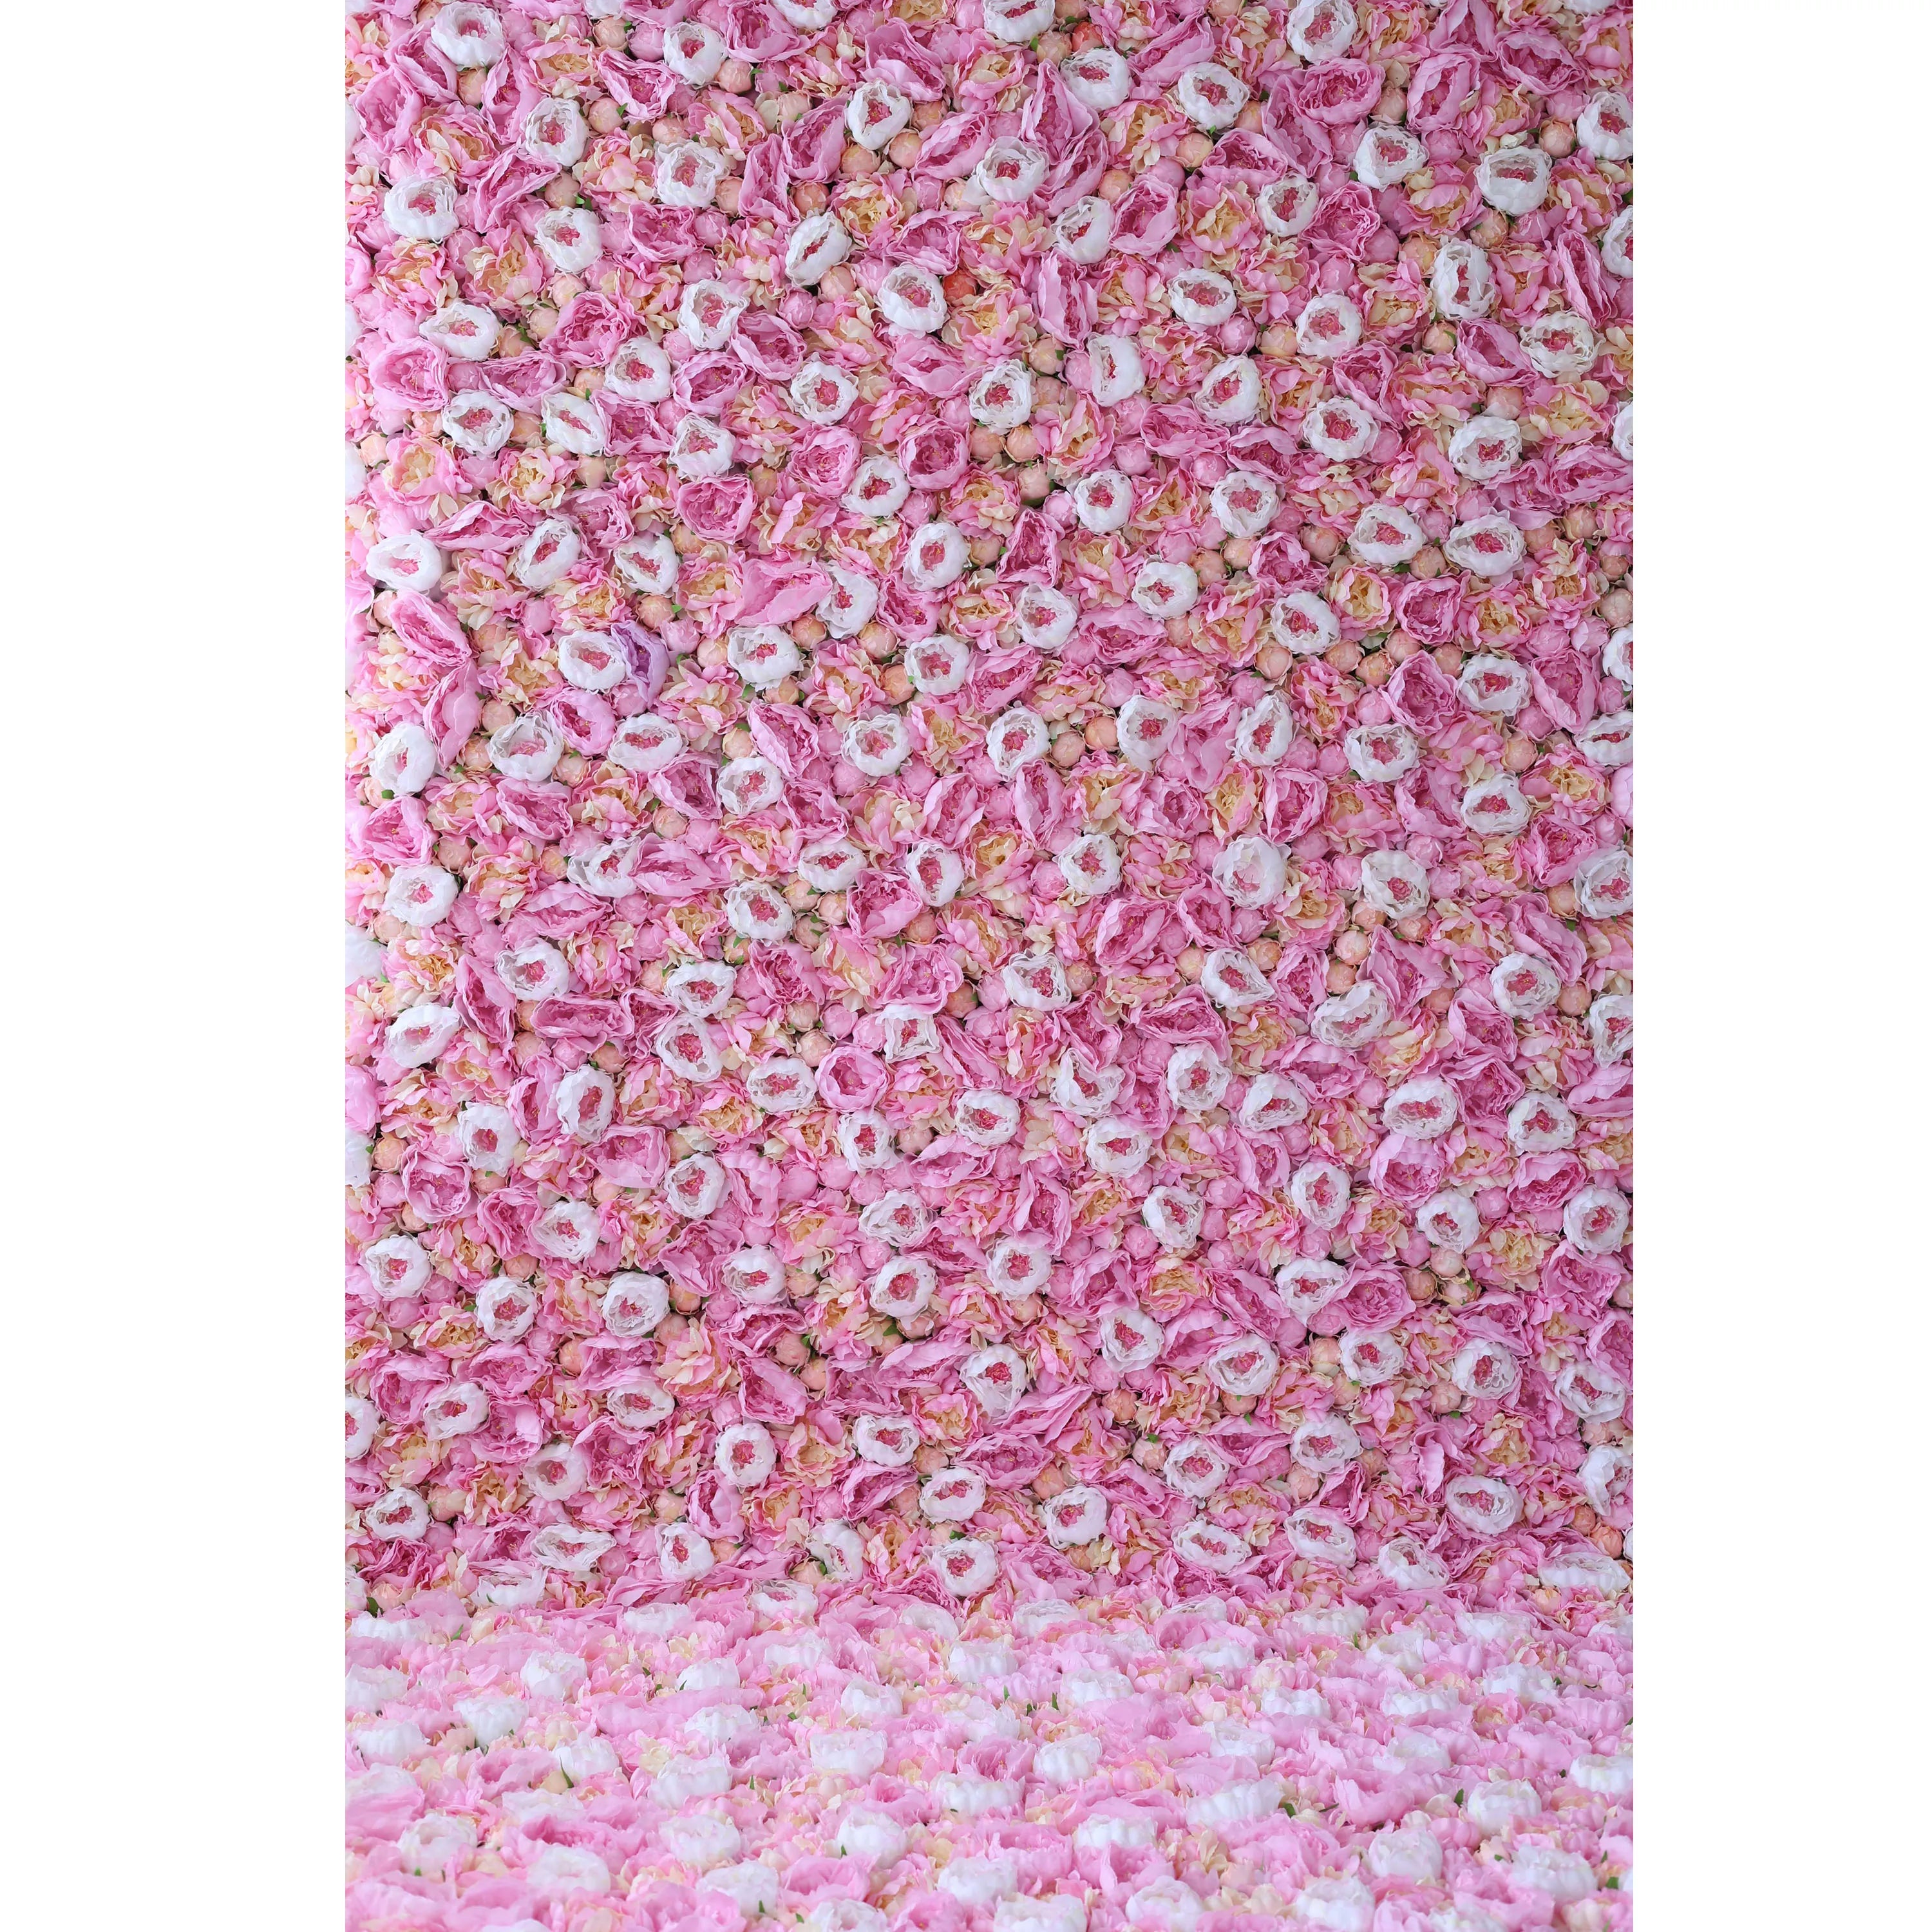 ValarFlower Artificial Floral Wall Backdrop: Blush Blossom - A Delicate Cascade of Soft Pink Petals-VF-275